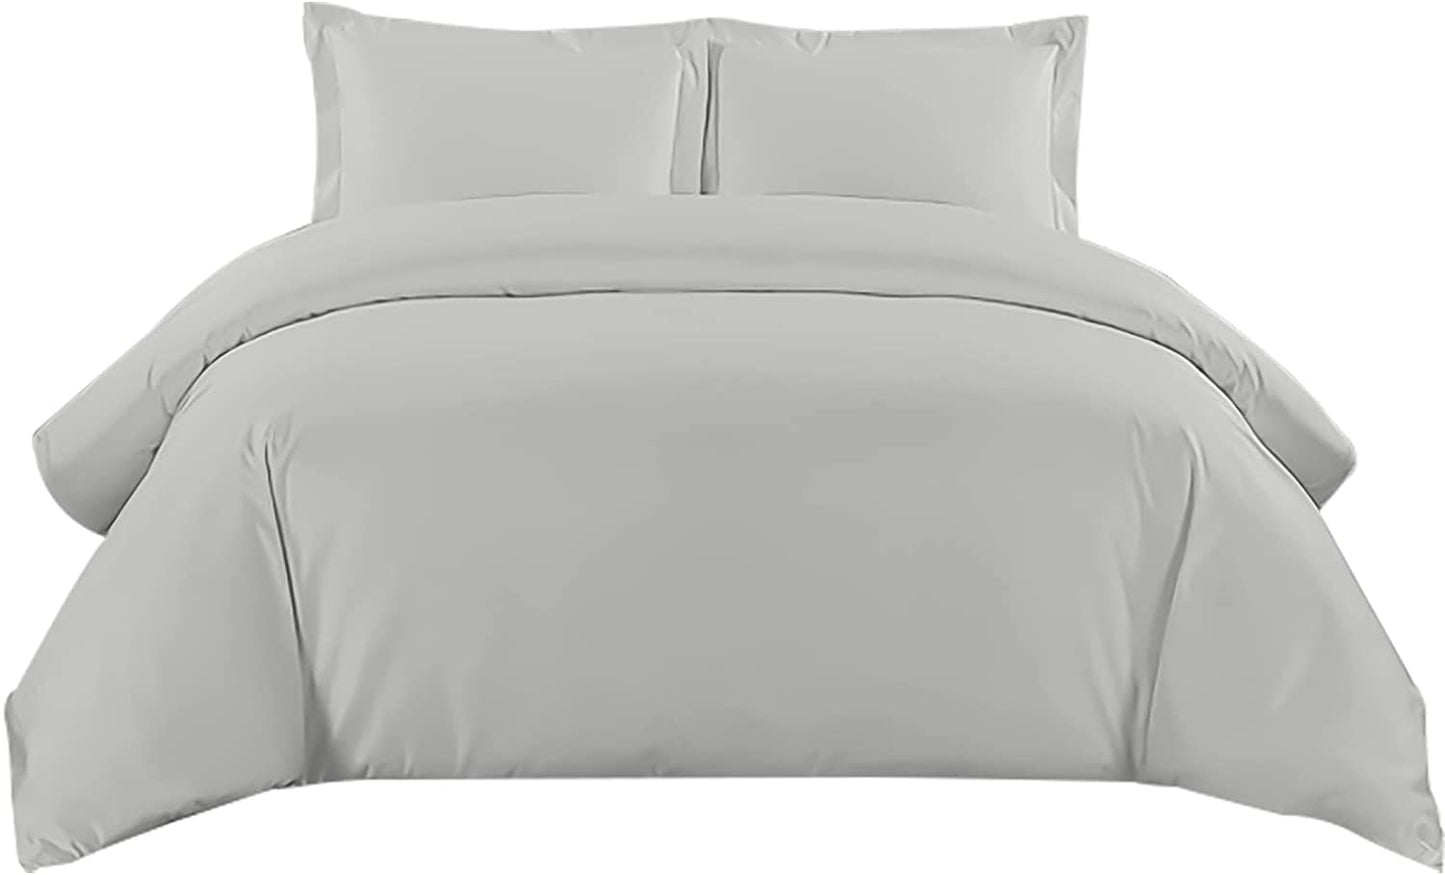 AmigoZone Hotel Quality Plain Brushed Micorfiber Duvet Cover Set, Duvet cover with Pillow cases